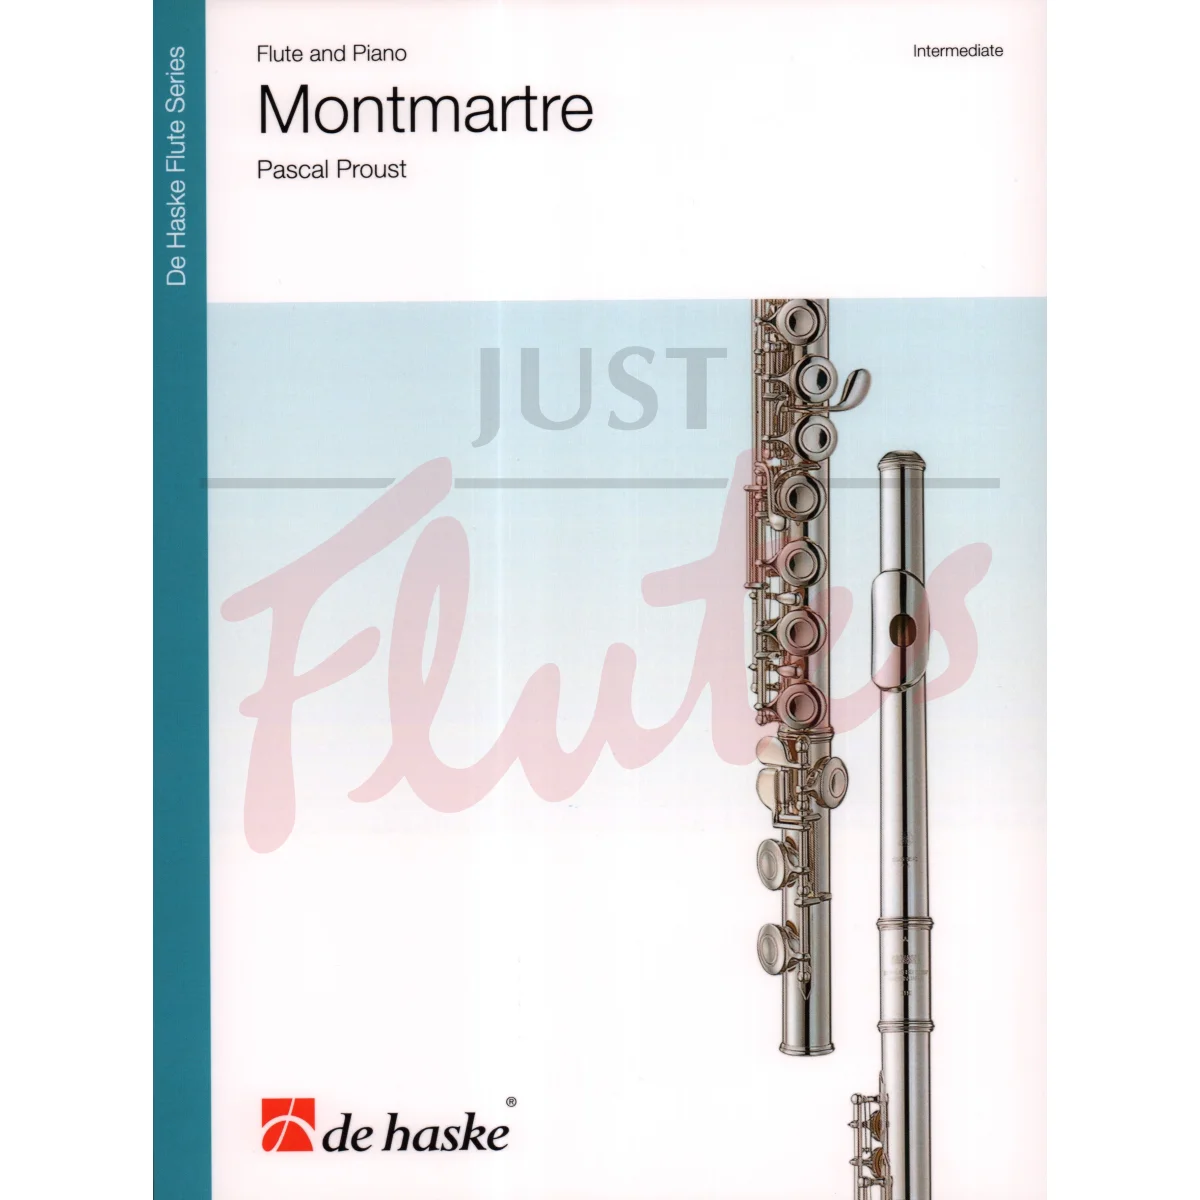 Montmartre for Flute and Piano